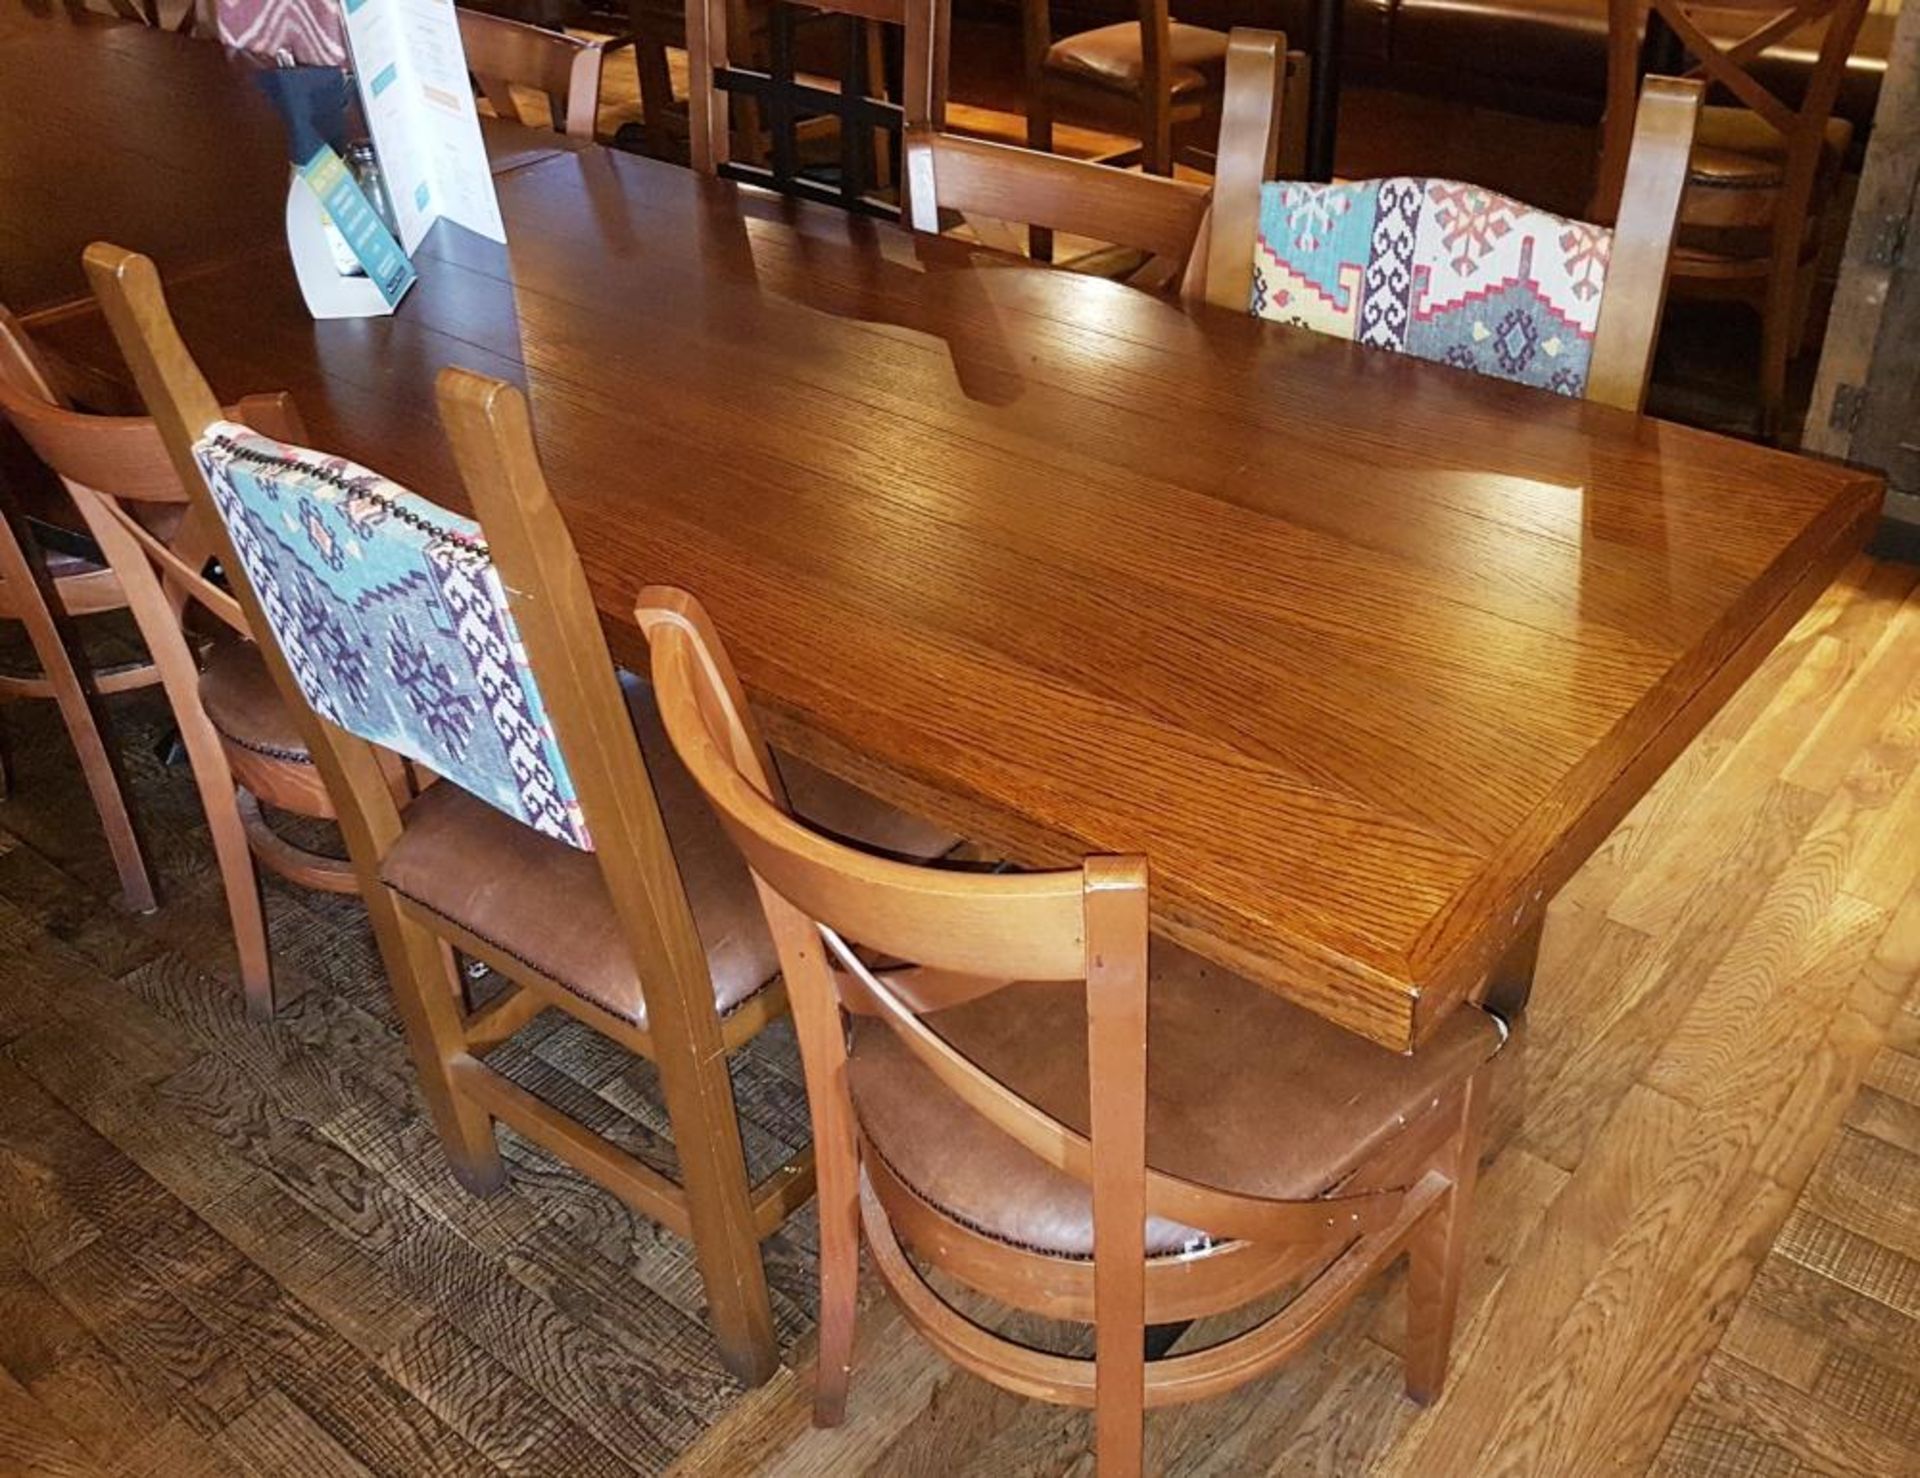 1 x Four Seater Rectangular Restaurant Dining Table With Cast Iron Bases and Wood Panelled Design - Image 2 of 2